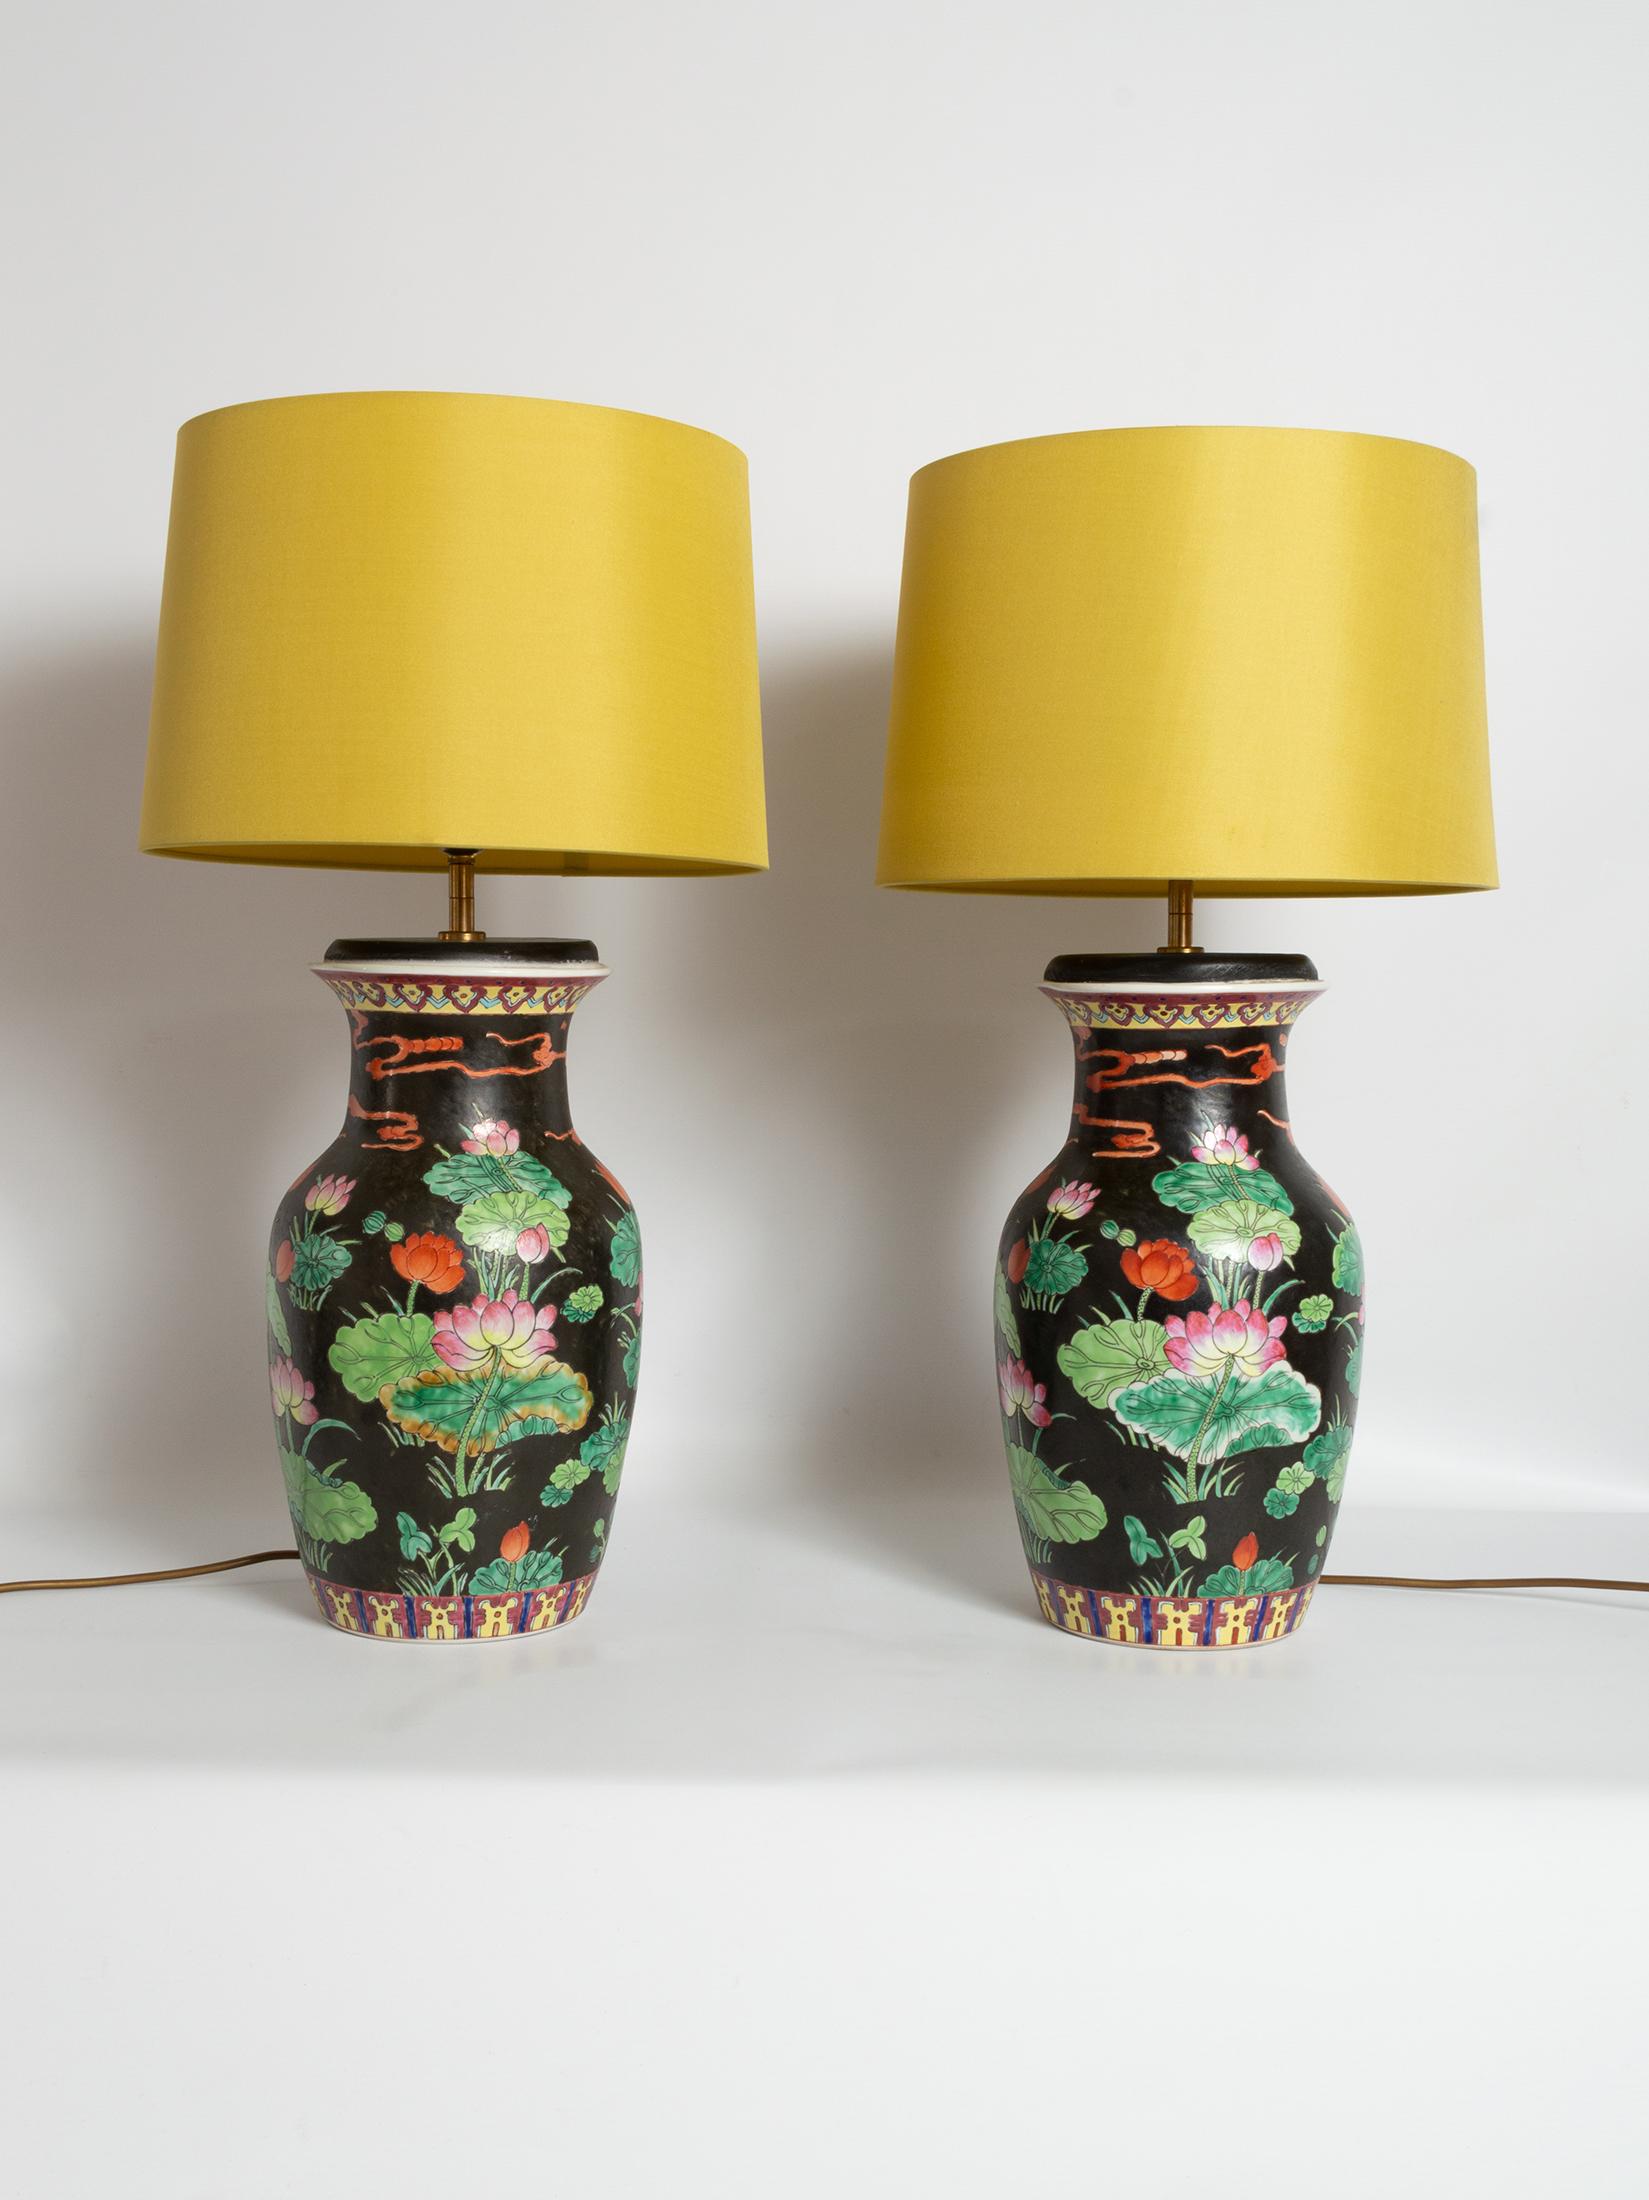 Antique Pair of 19th Century Famille Noire Chinese Vase Lamps, circa 1860 For Sale 1